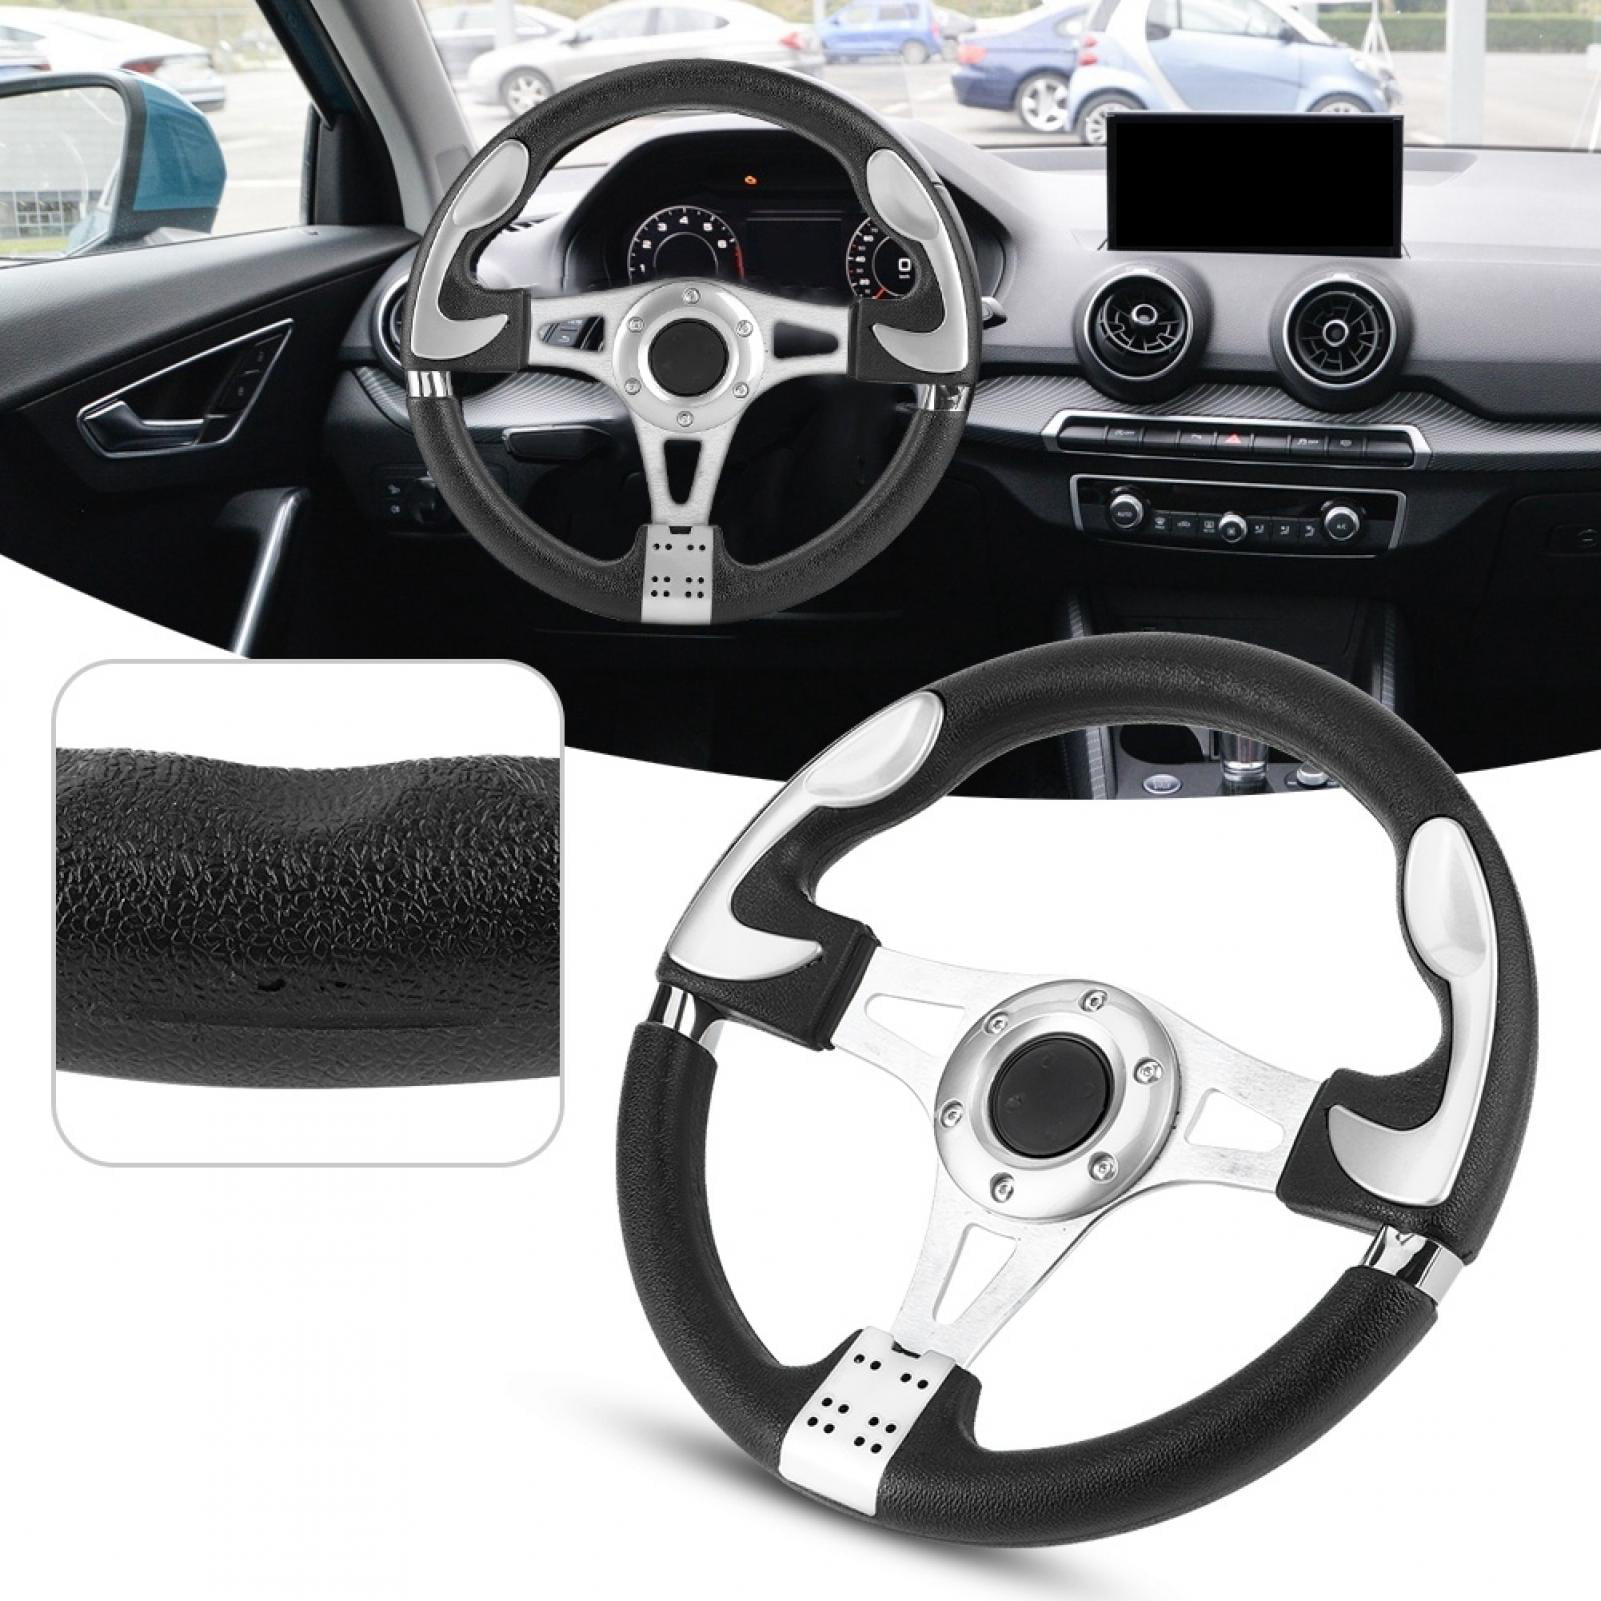 2x Horn Buttons Cover Rubber Buttons Steering Wheel 